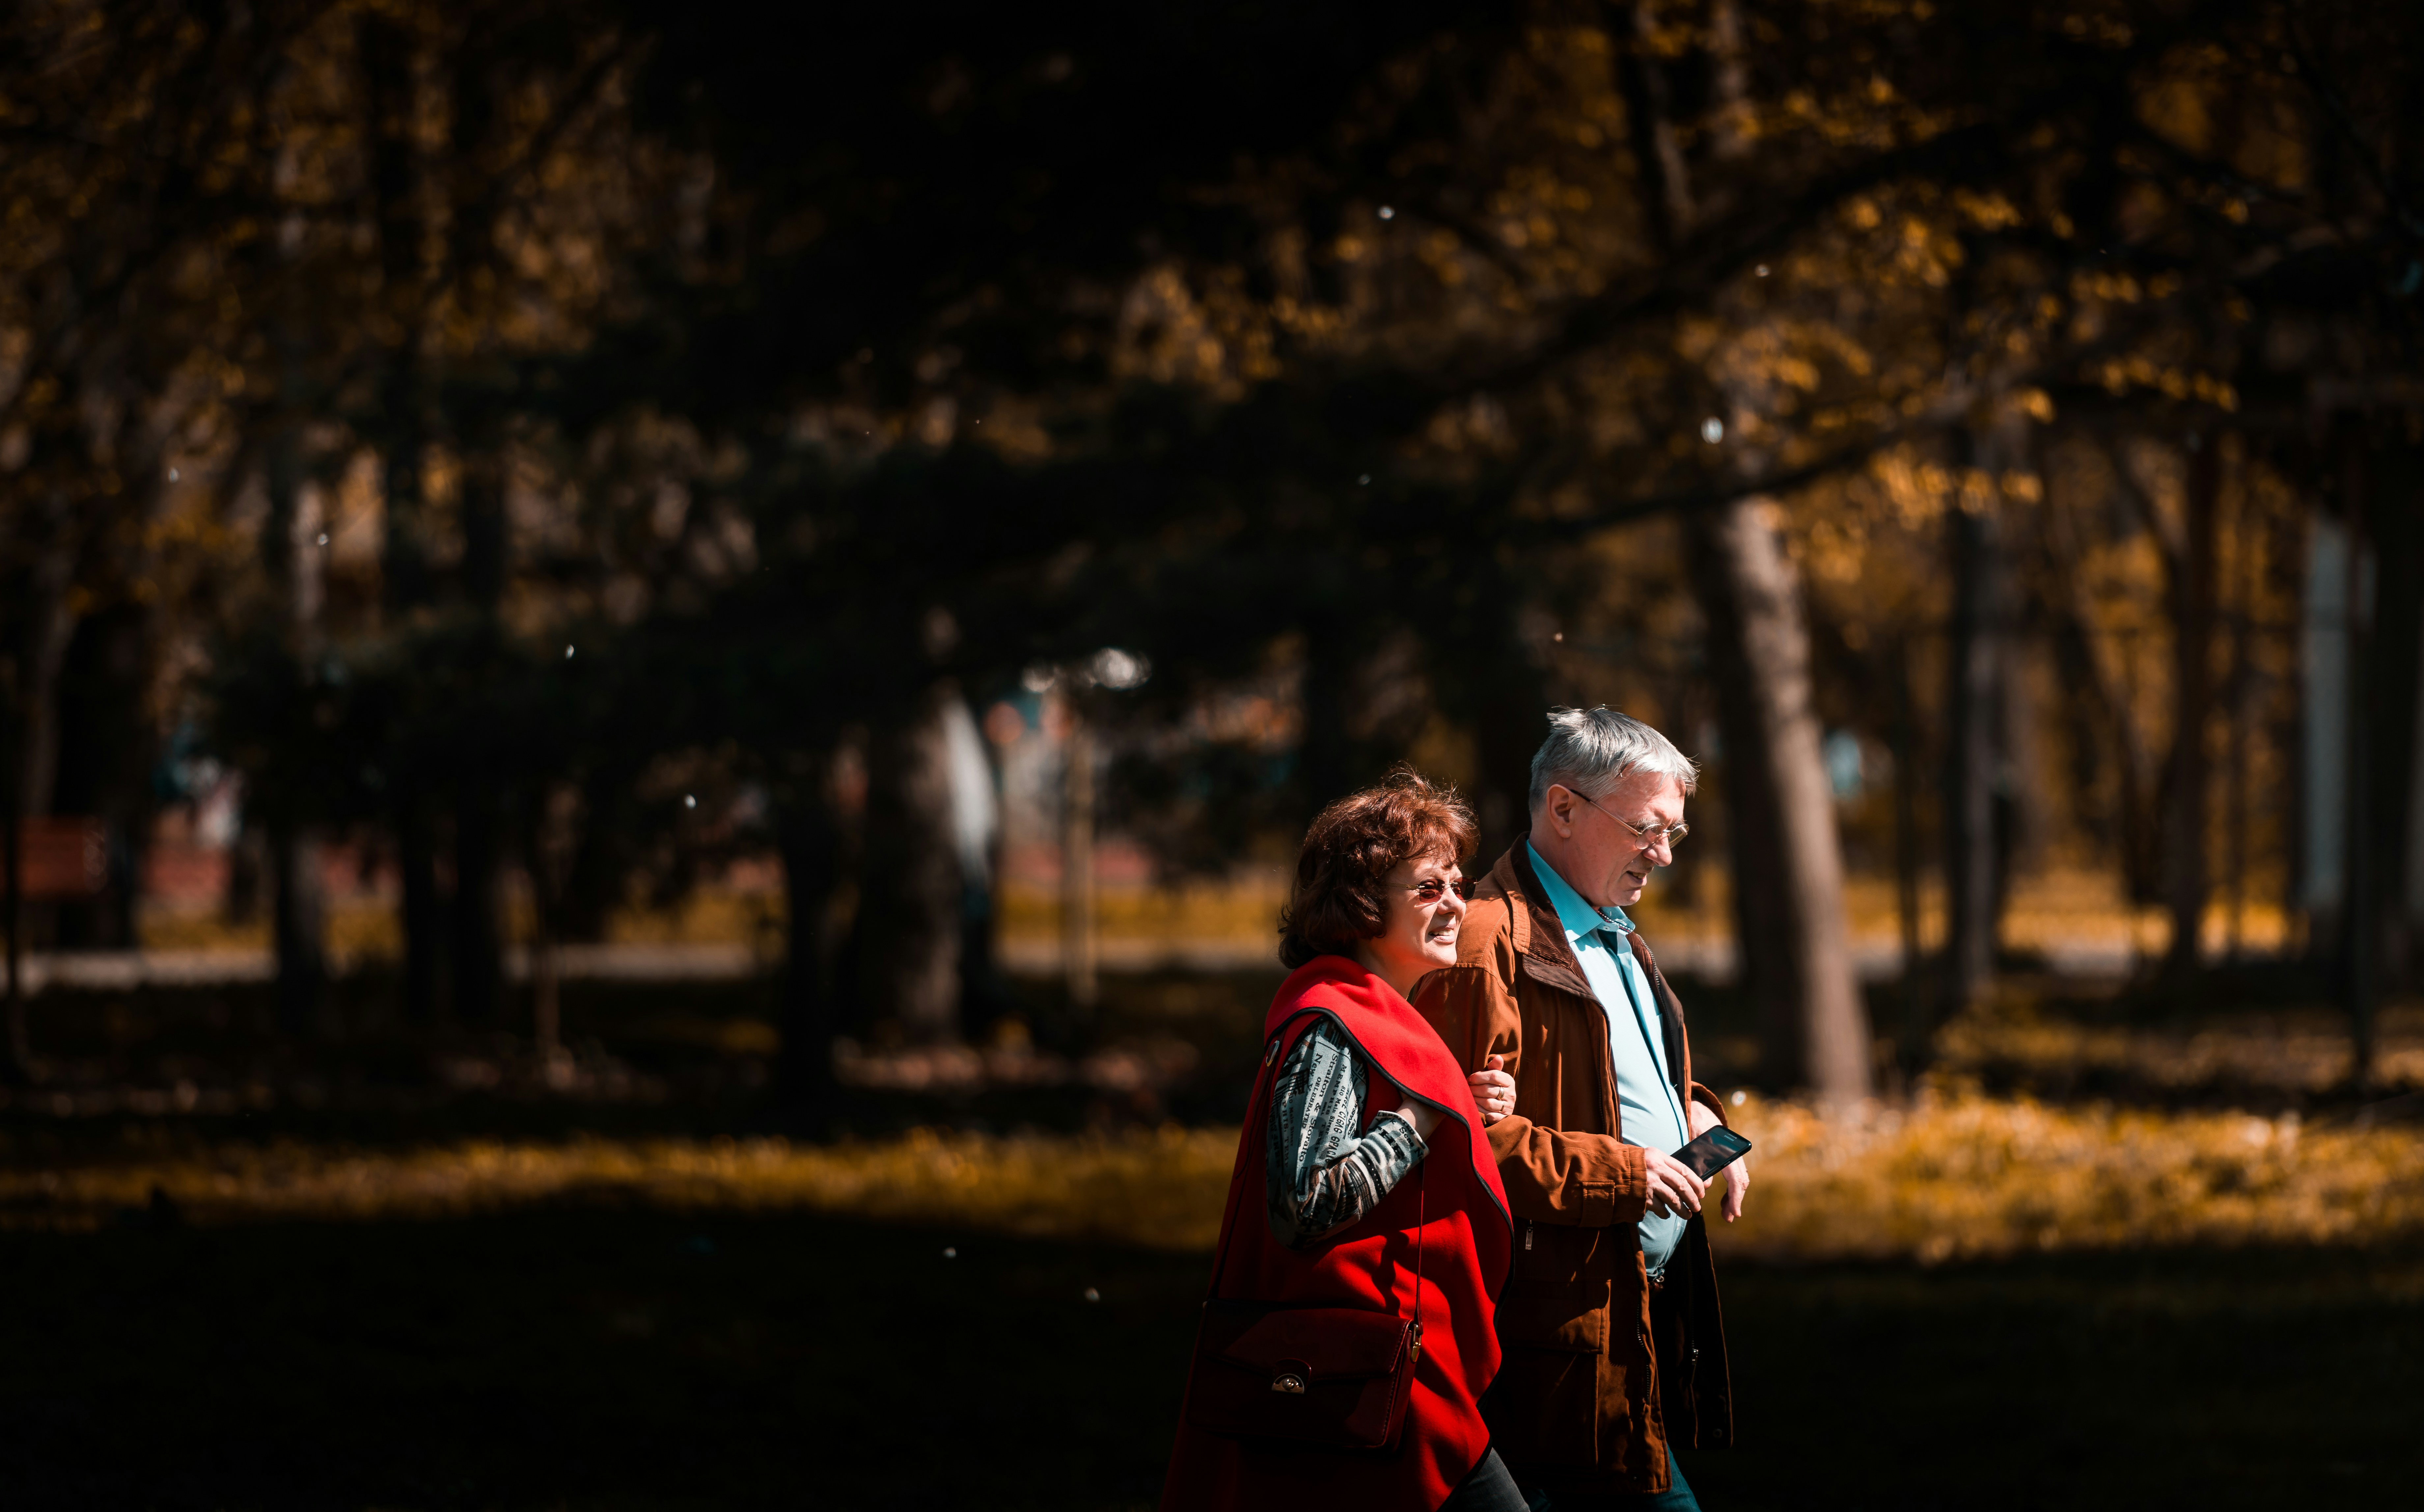 couple enjoying four season in rochester ny park in the fall